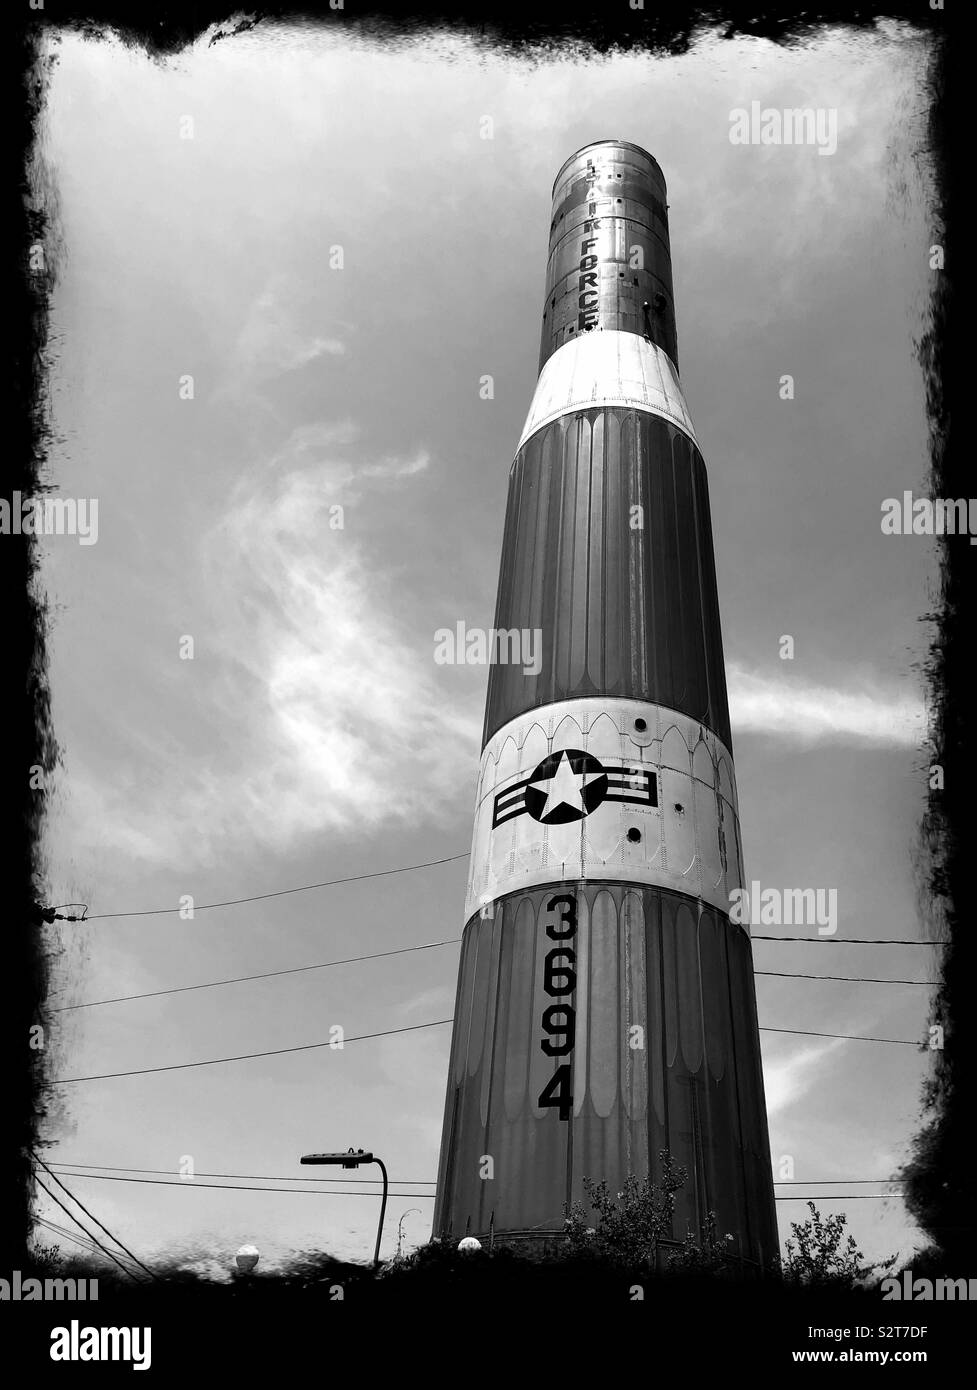 A Titan 1 Intercontinental Ballistic Missile at the intersection of Interstate 75 and Highway 280 in Cordele, Georgia, USA. Stock Photo